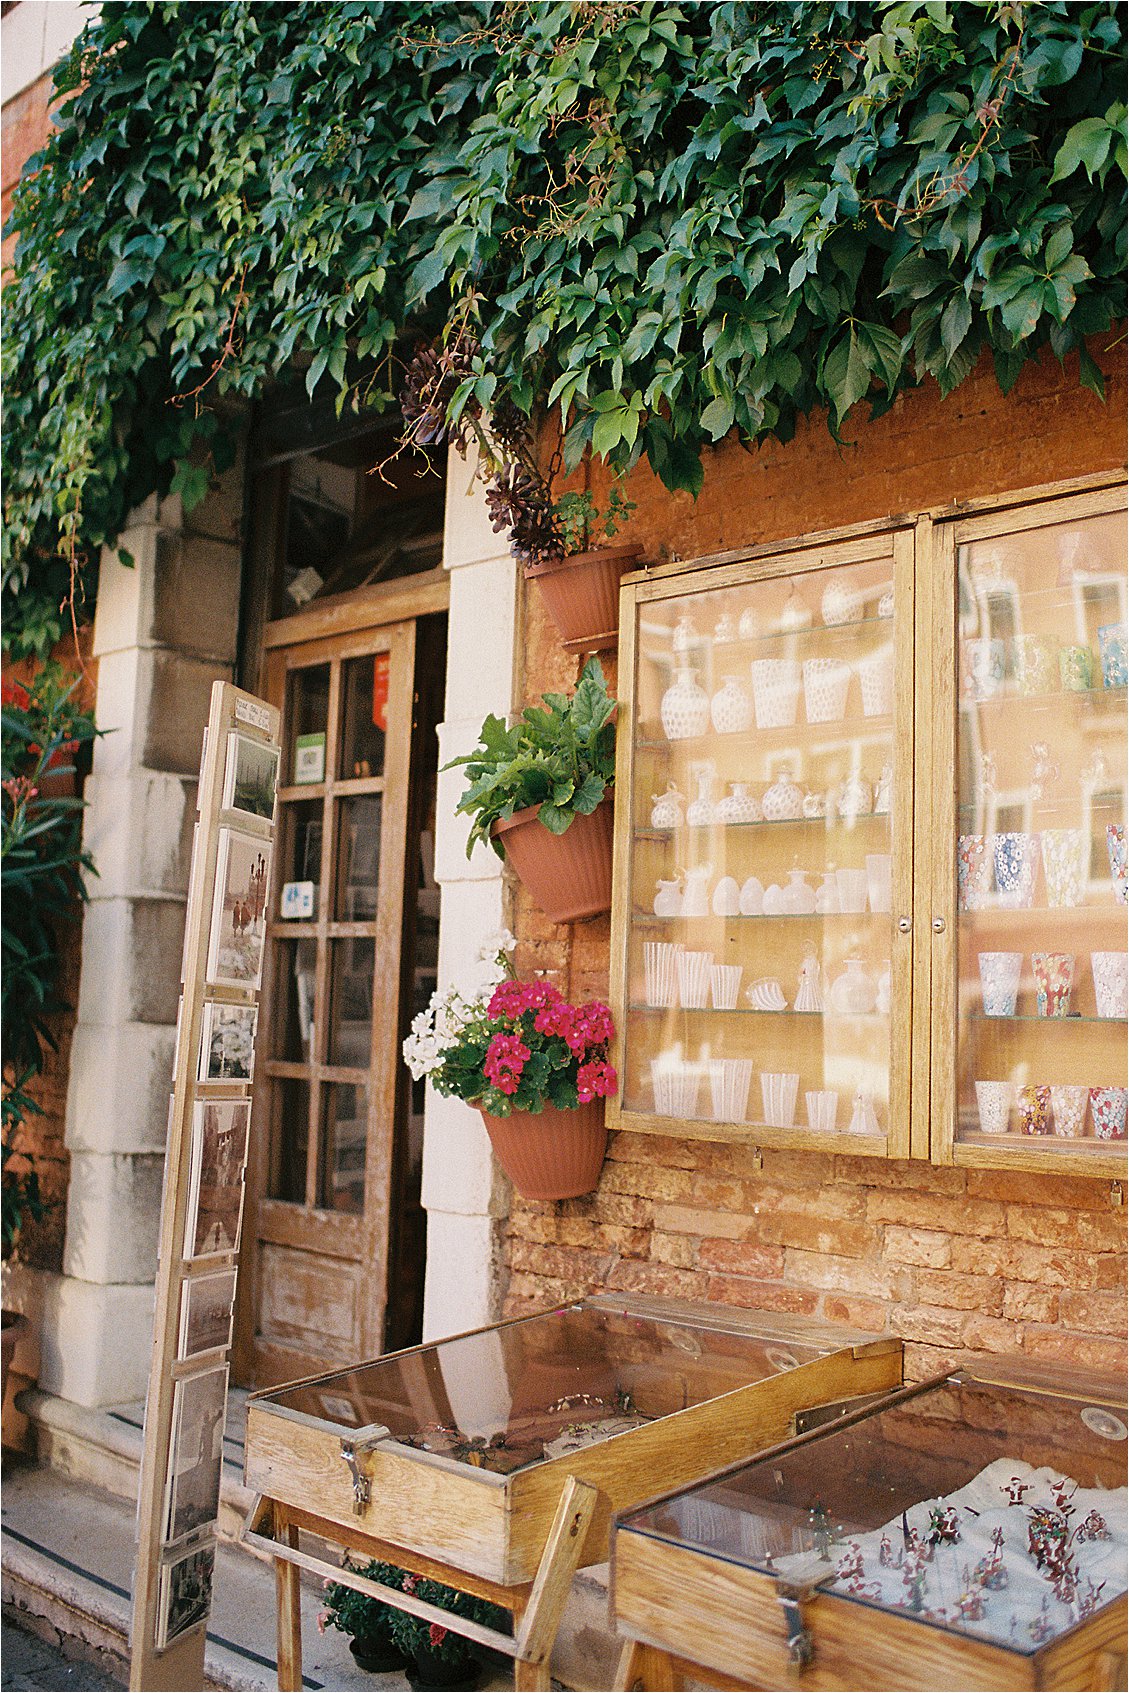 Shop in Venice, Italy on film